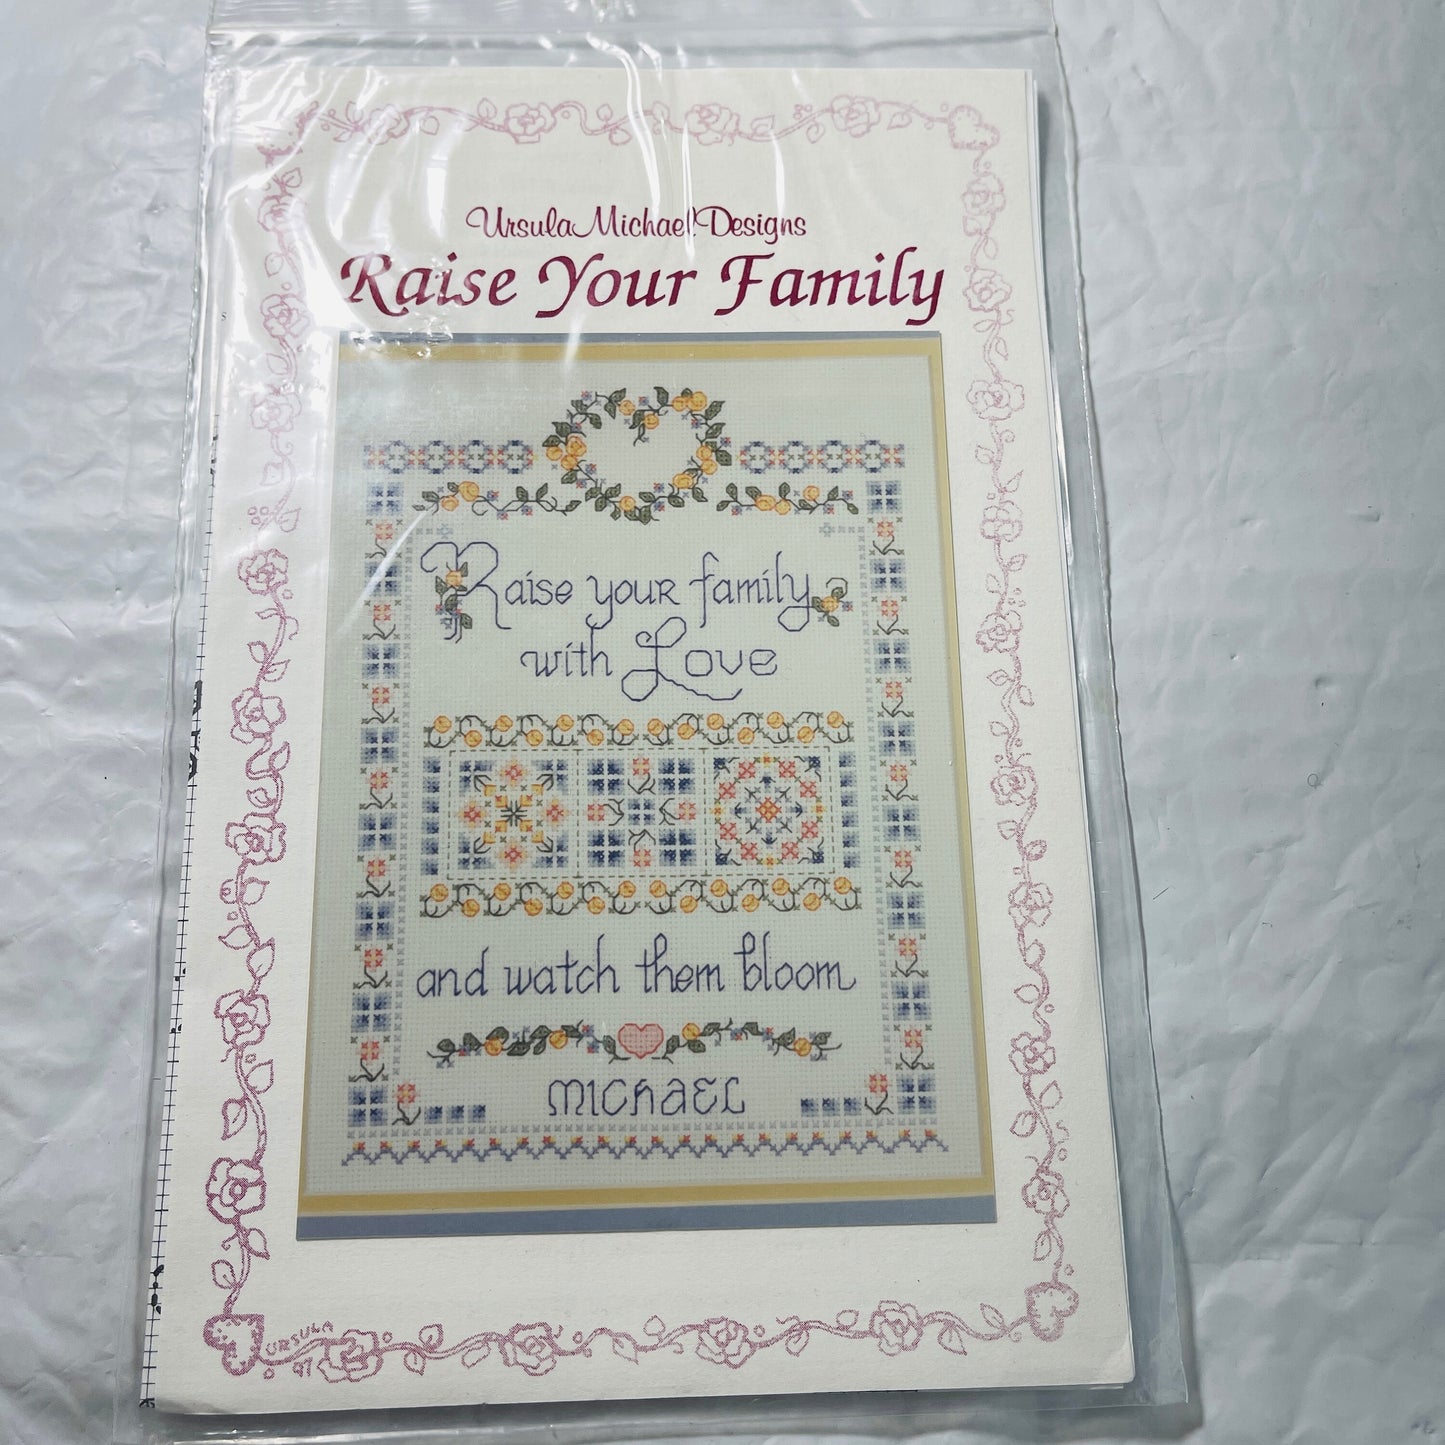 Ursula Michael Designs, Raise Your Family, #185, Counted Cross Stitch Chart 8 by 12 inches